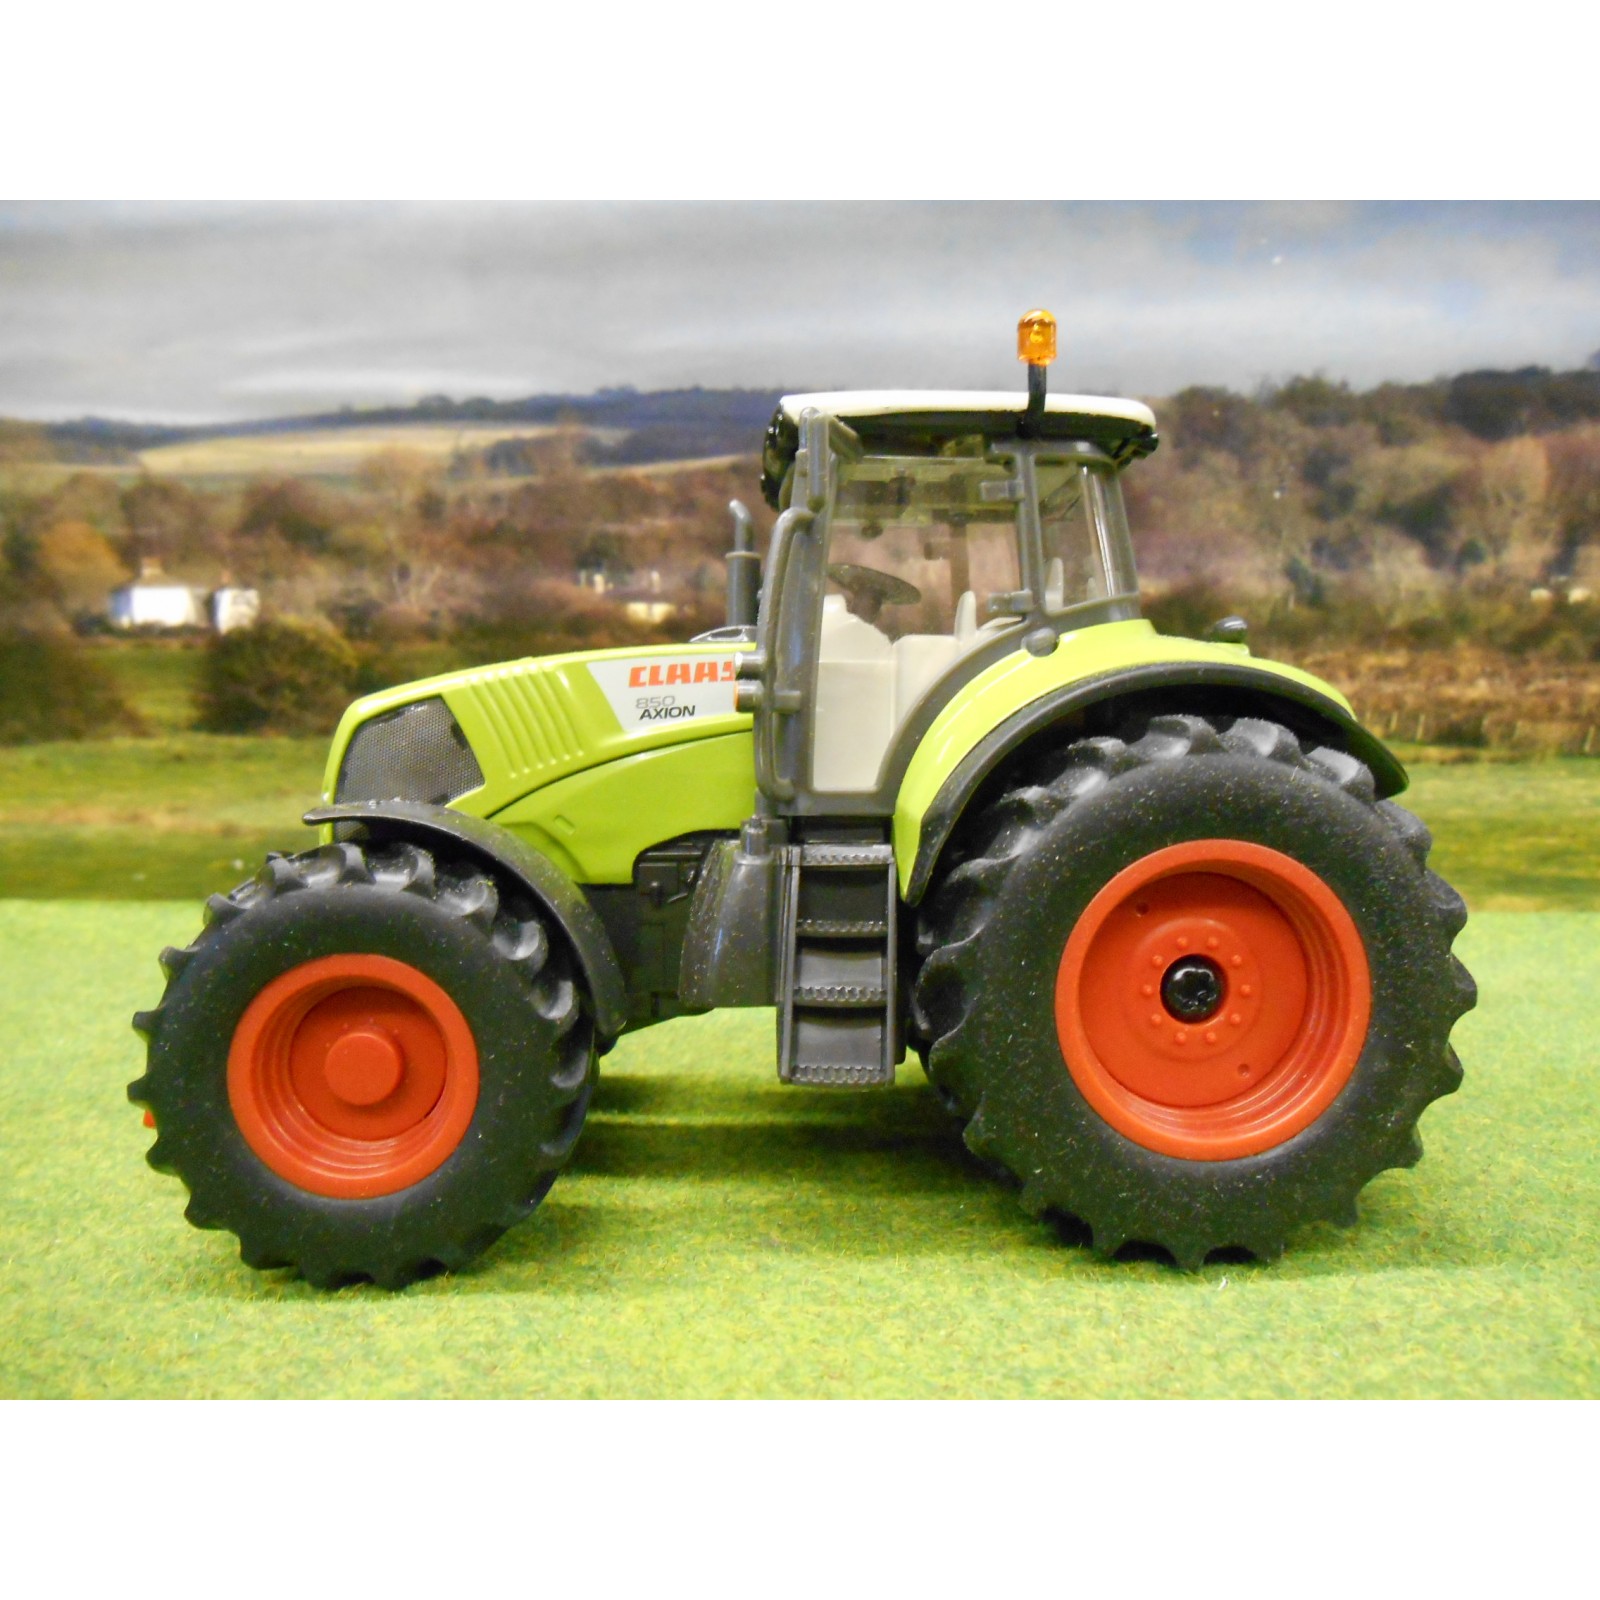 SIKU Control32 6882 Claas Axion 850 Tractor for sale online 